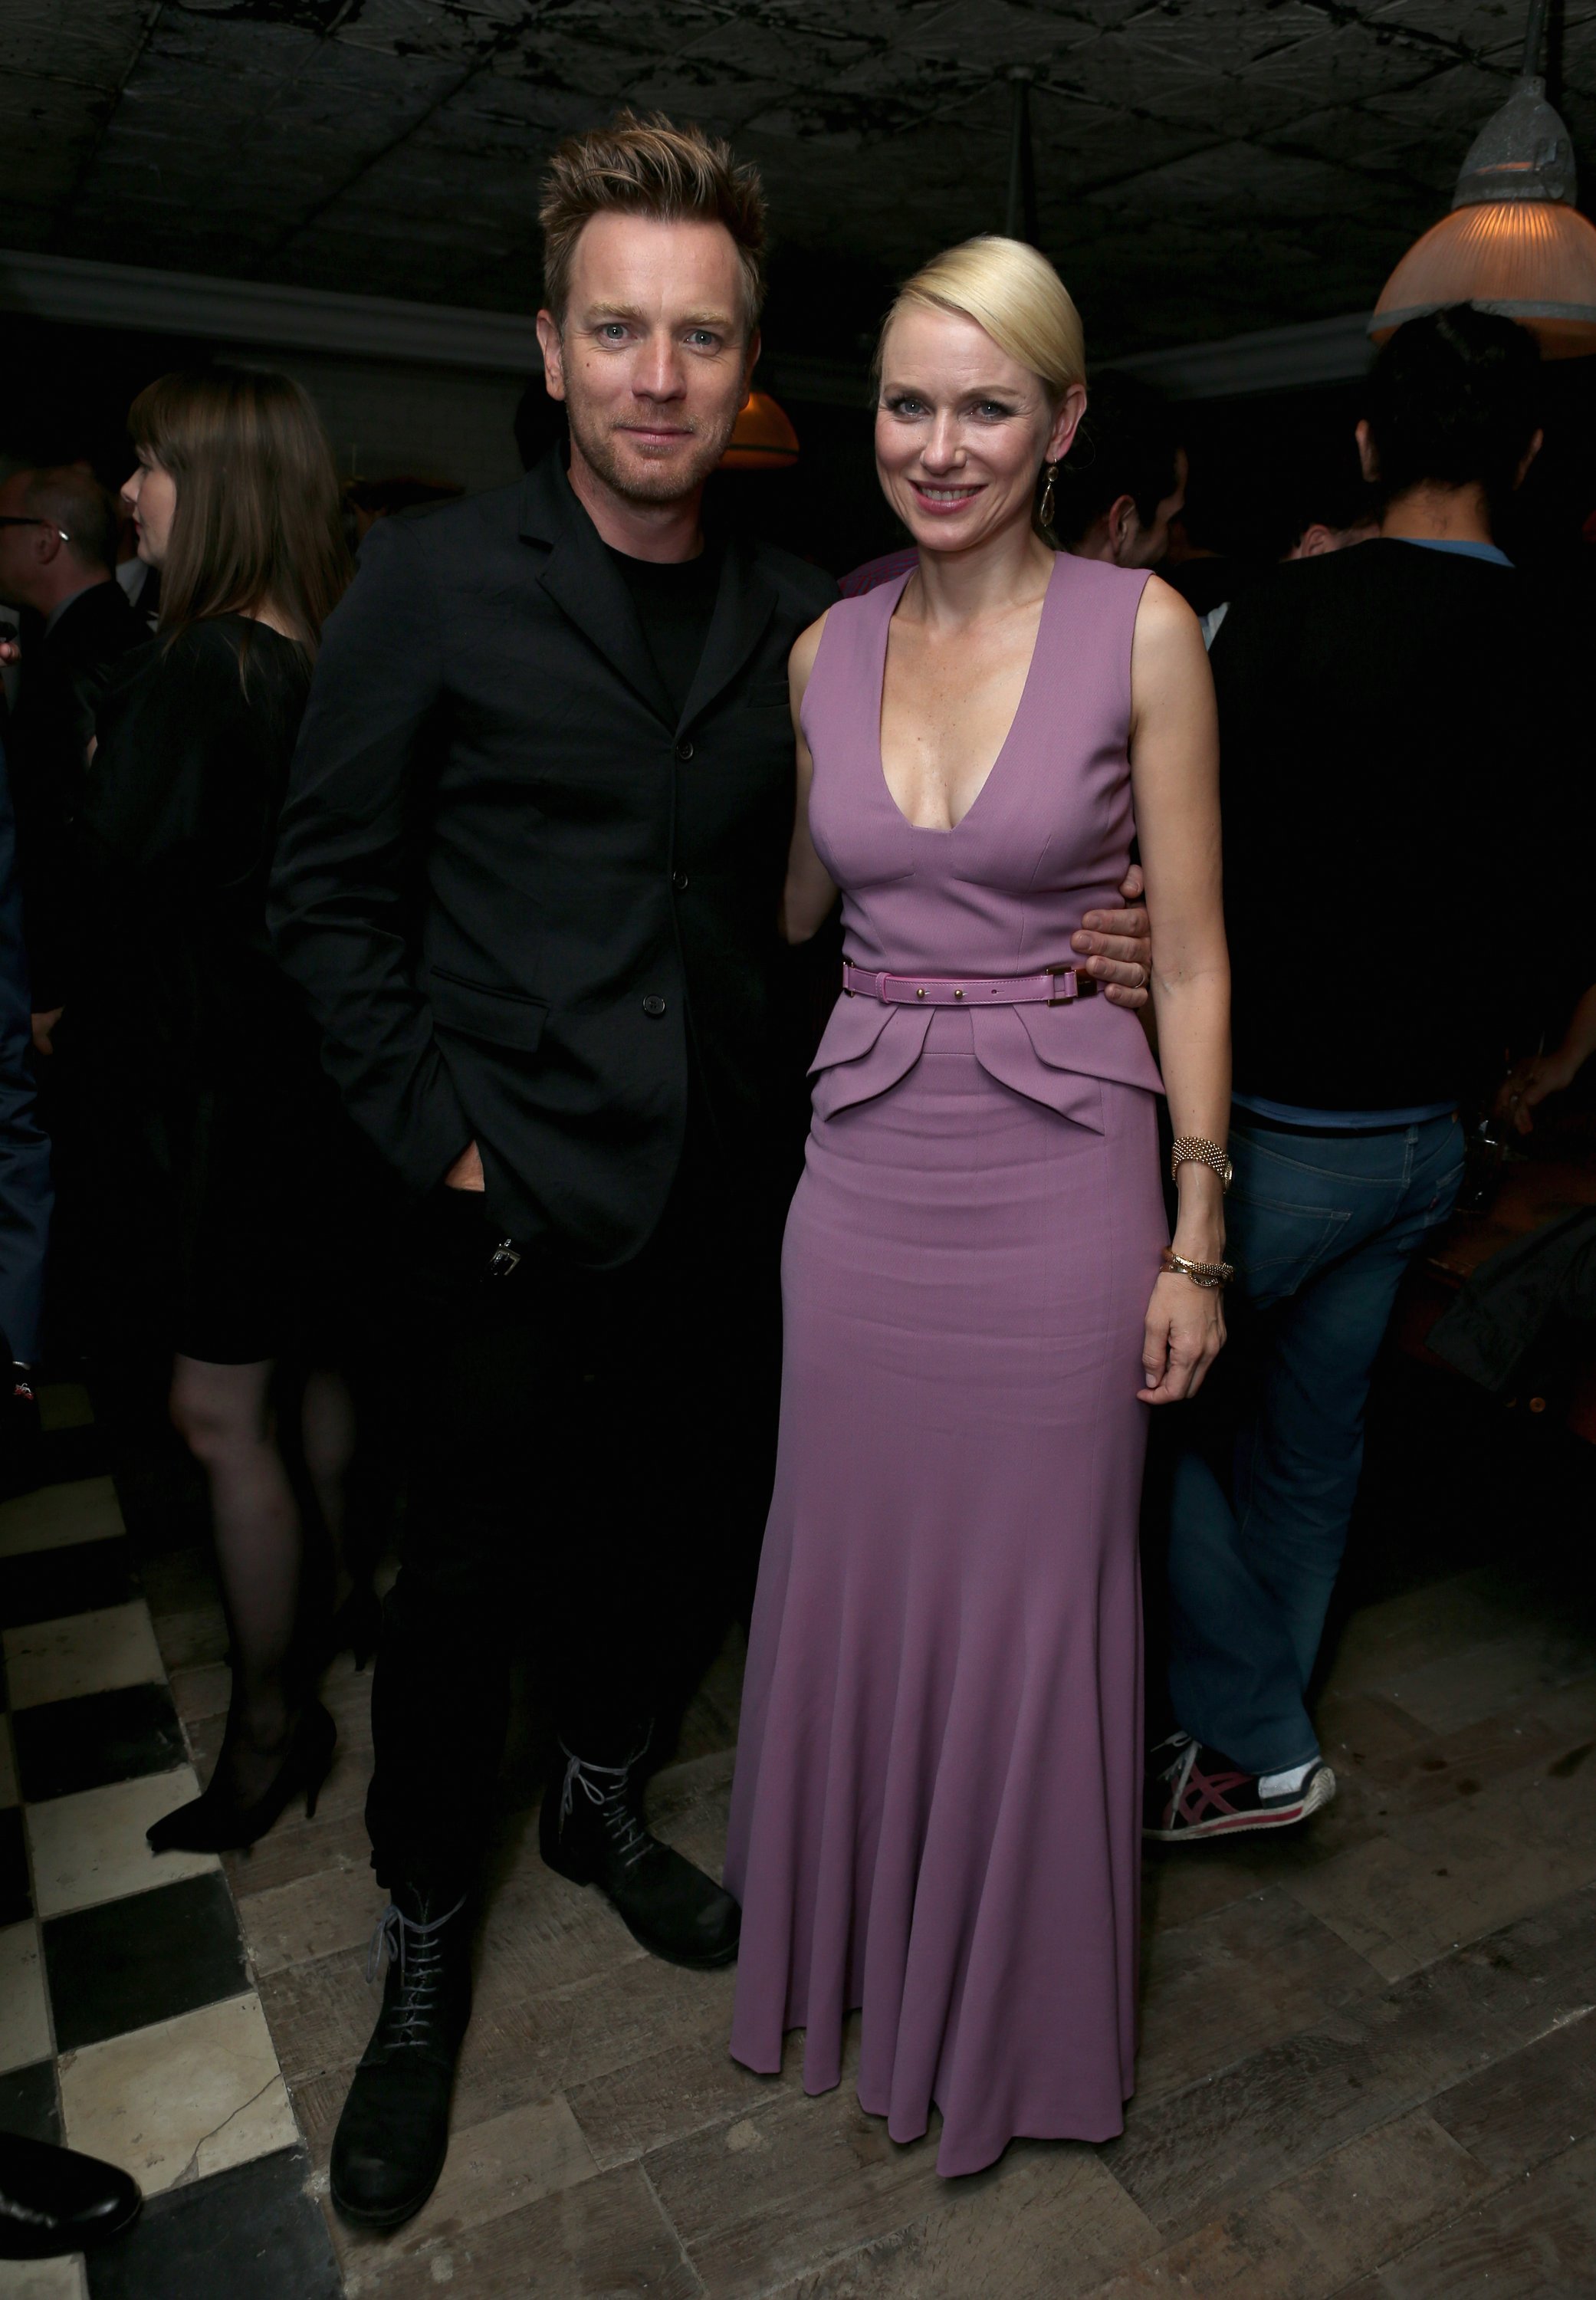 2012-09-09-TIFF-The-Impossible-Premiere-047.jpg